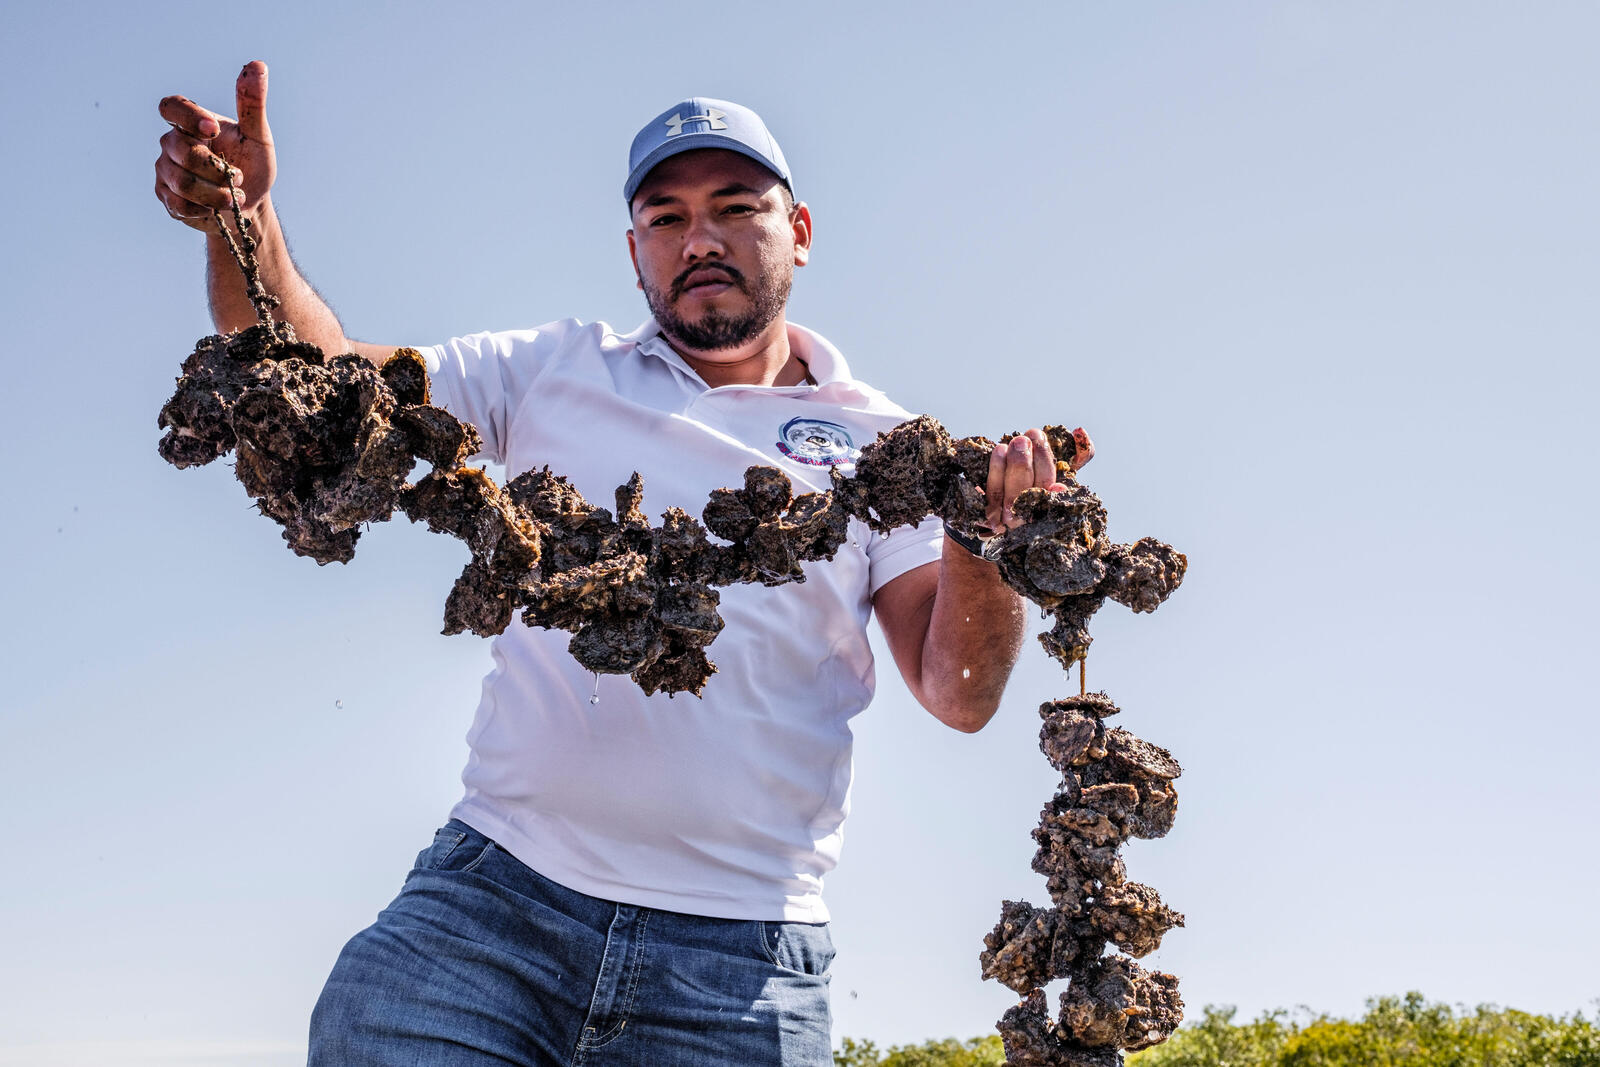 Pedro Alfonso Lopez Gonzalez holds a string of oysters on a sunny day